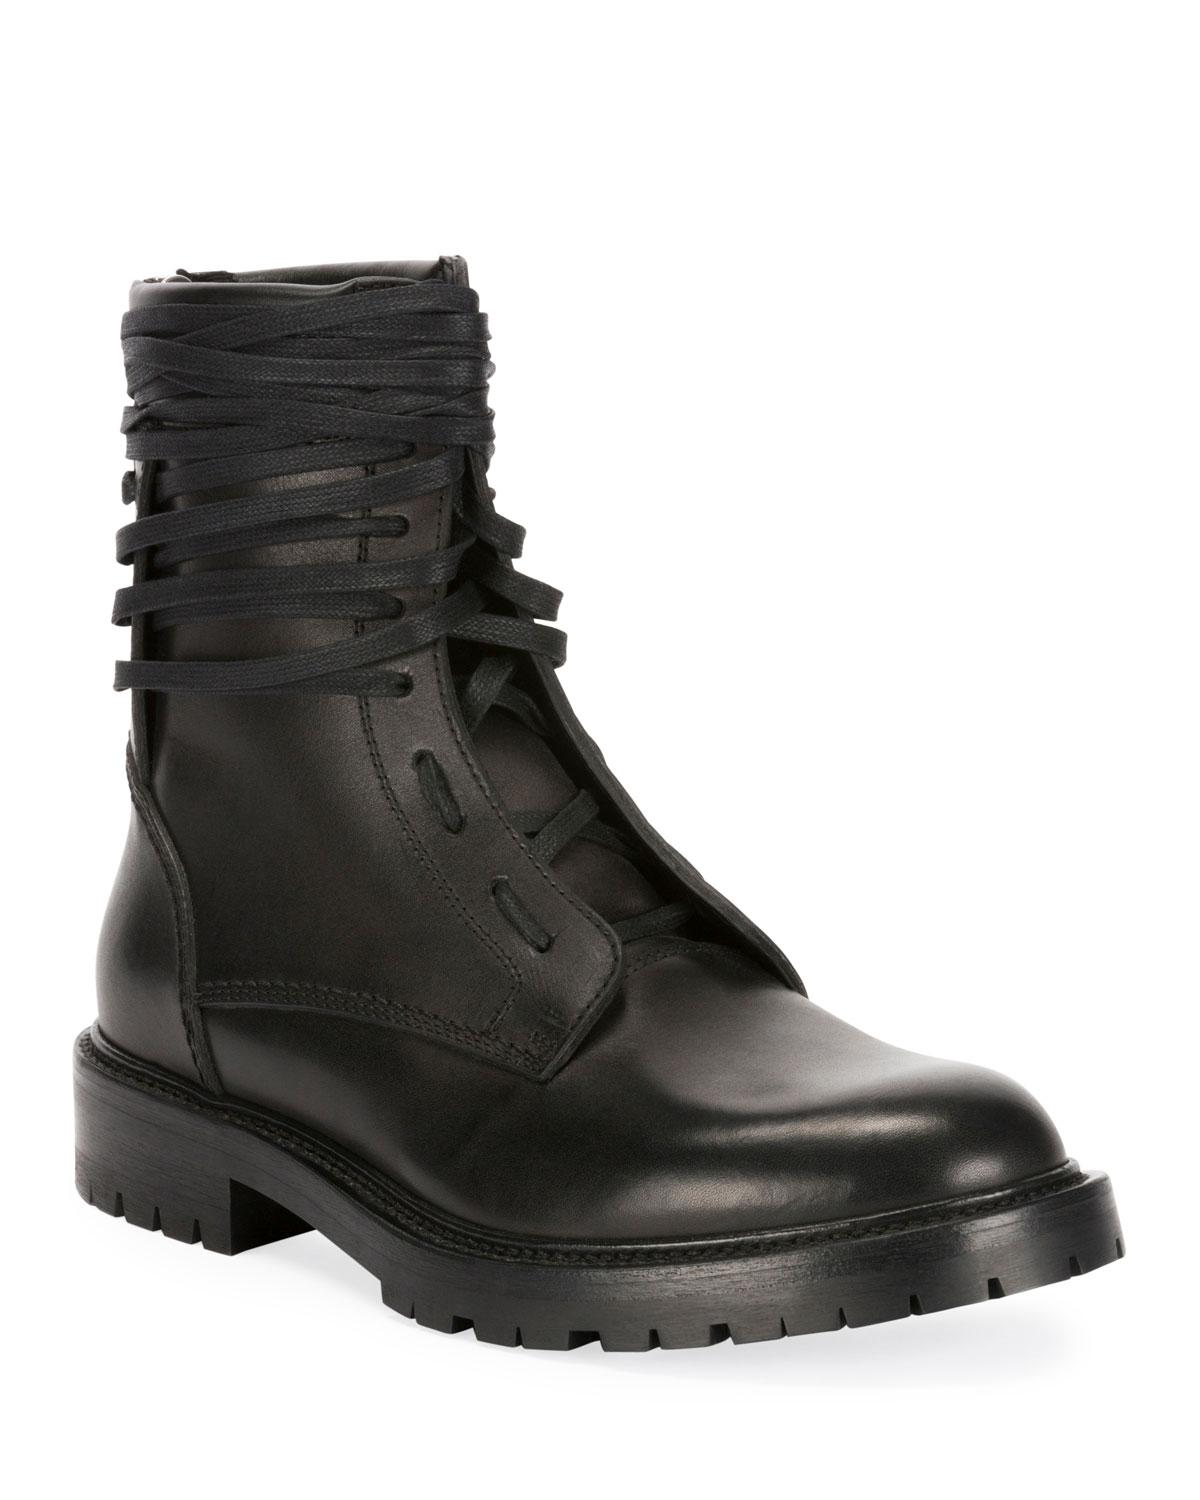 Amiri Leather Combat Boot in Black for Men - Save 57% - Lyst